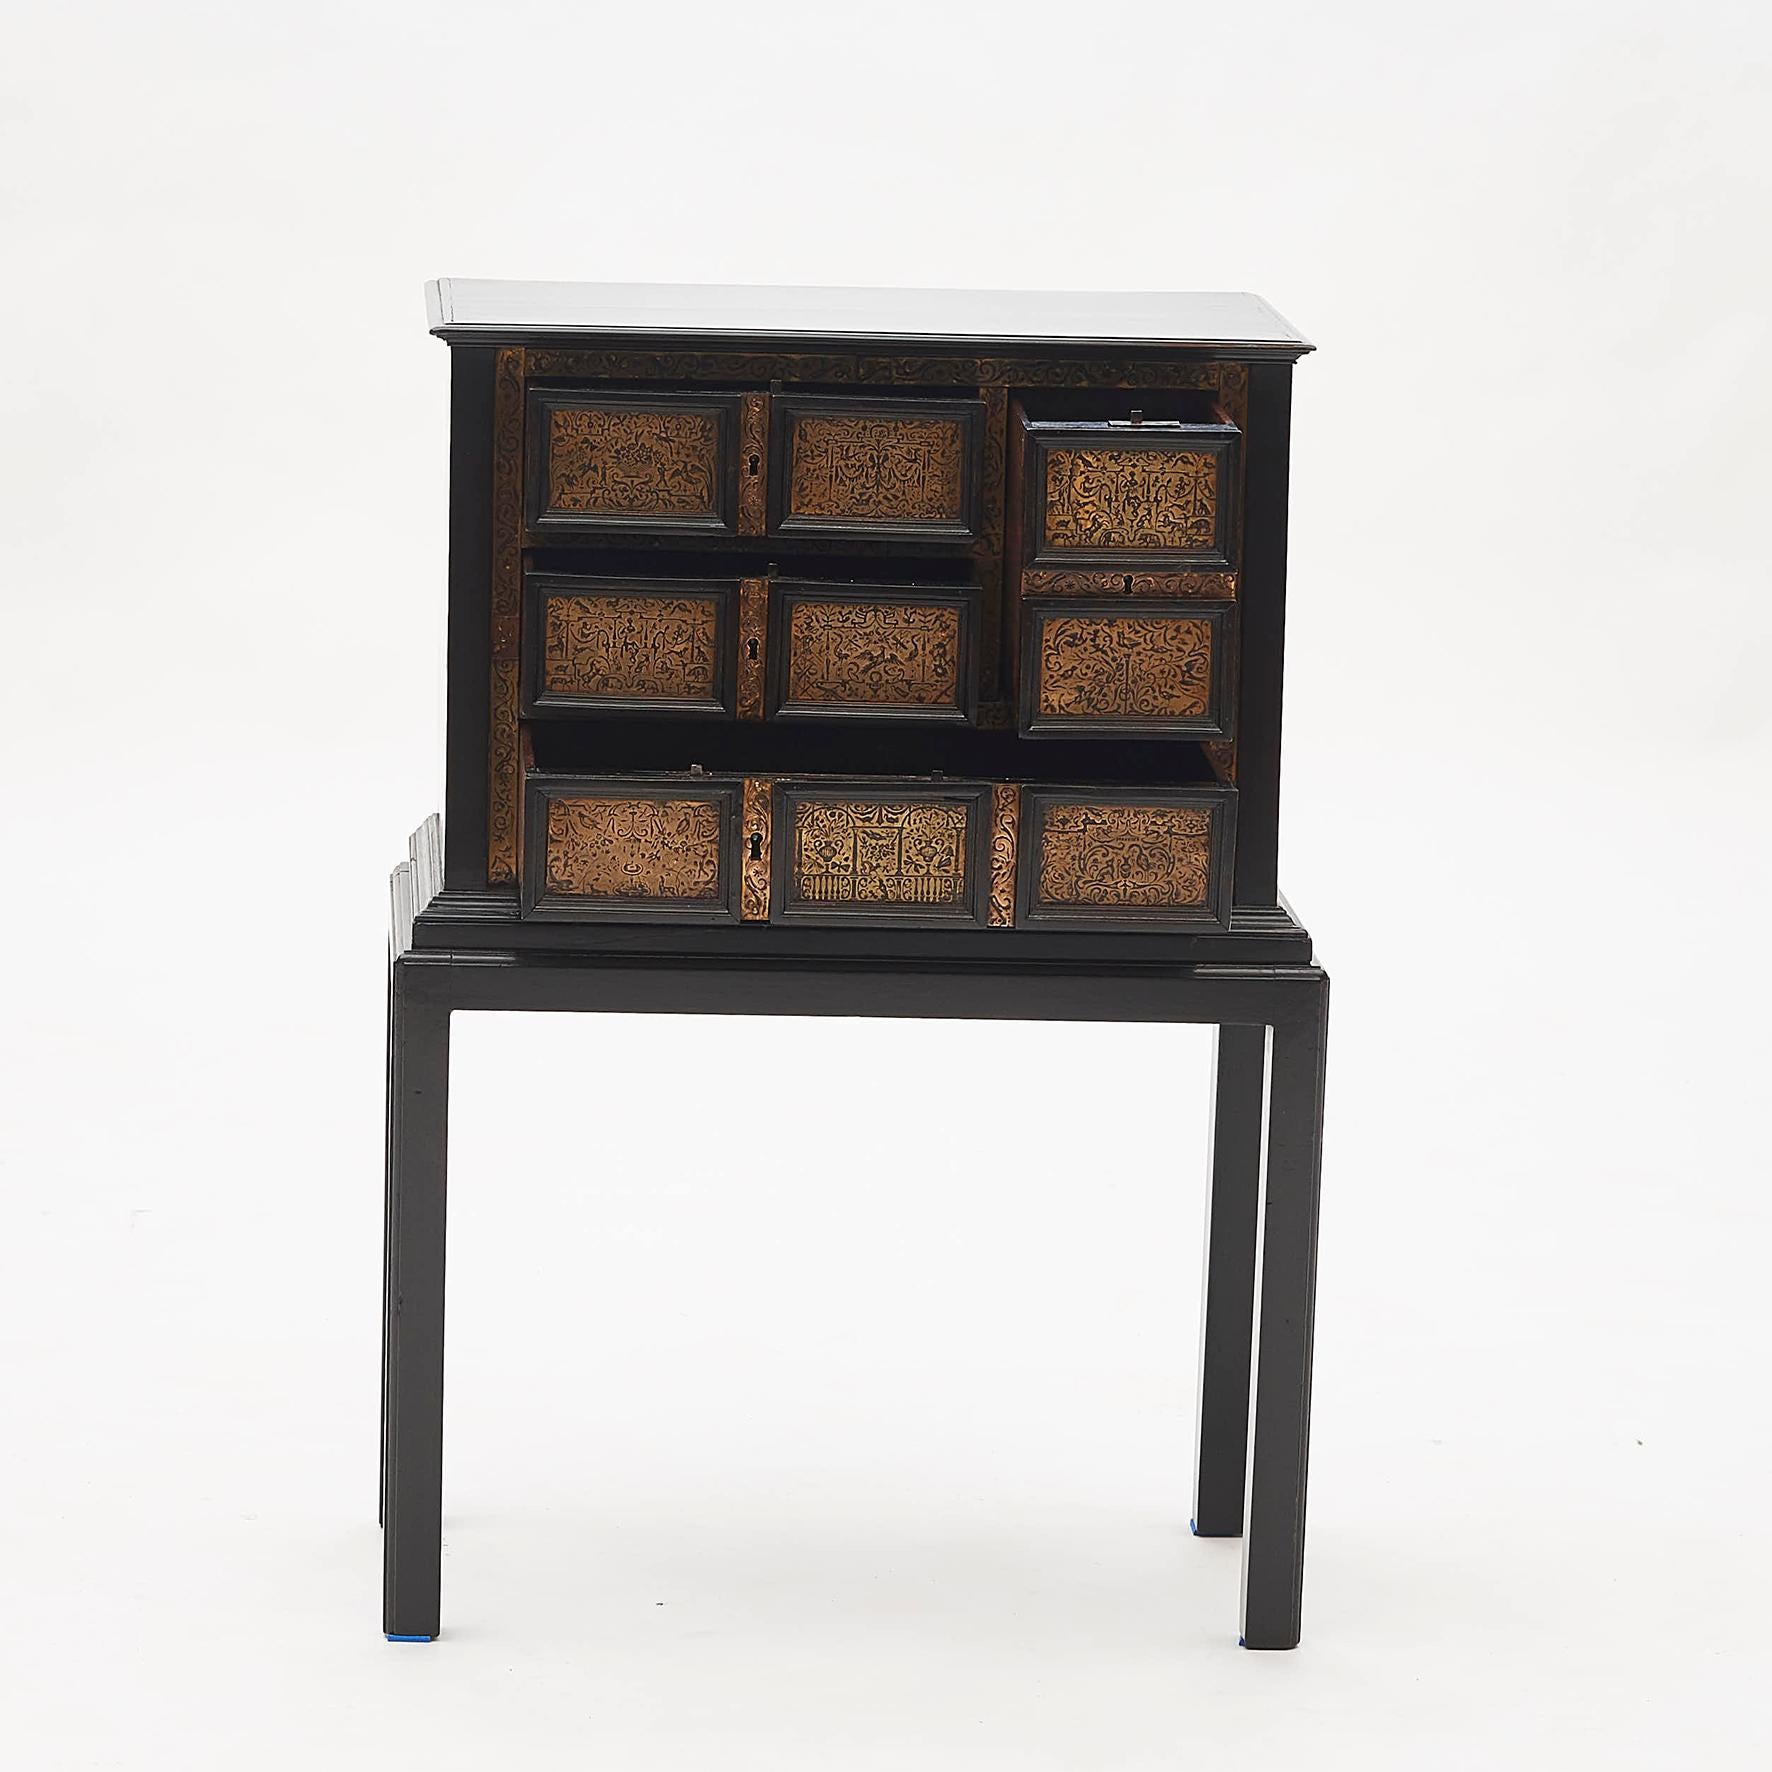 Small elegant baroque cabinet in ebonized wood. 4 drawers. Drawers and frame with ornamented brass engravings in the form of animals and people, Italy, circa 1700-1730. Later base.